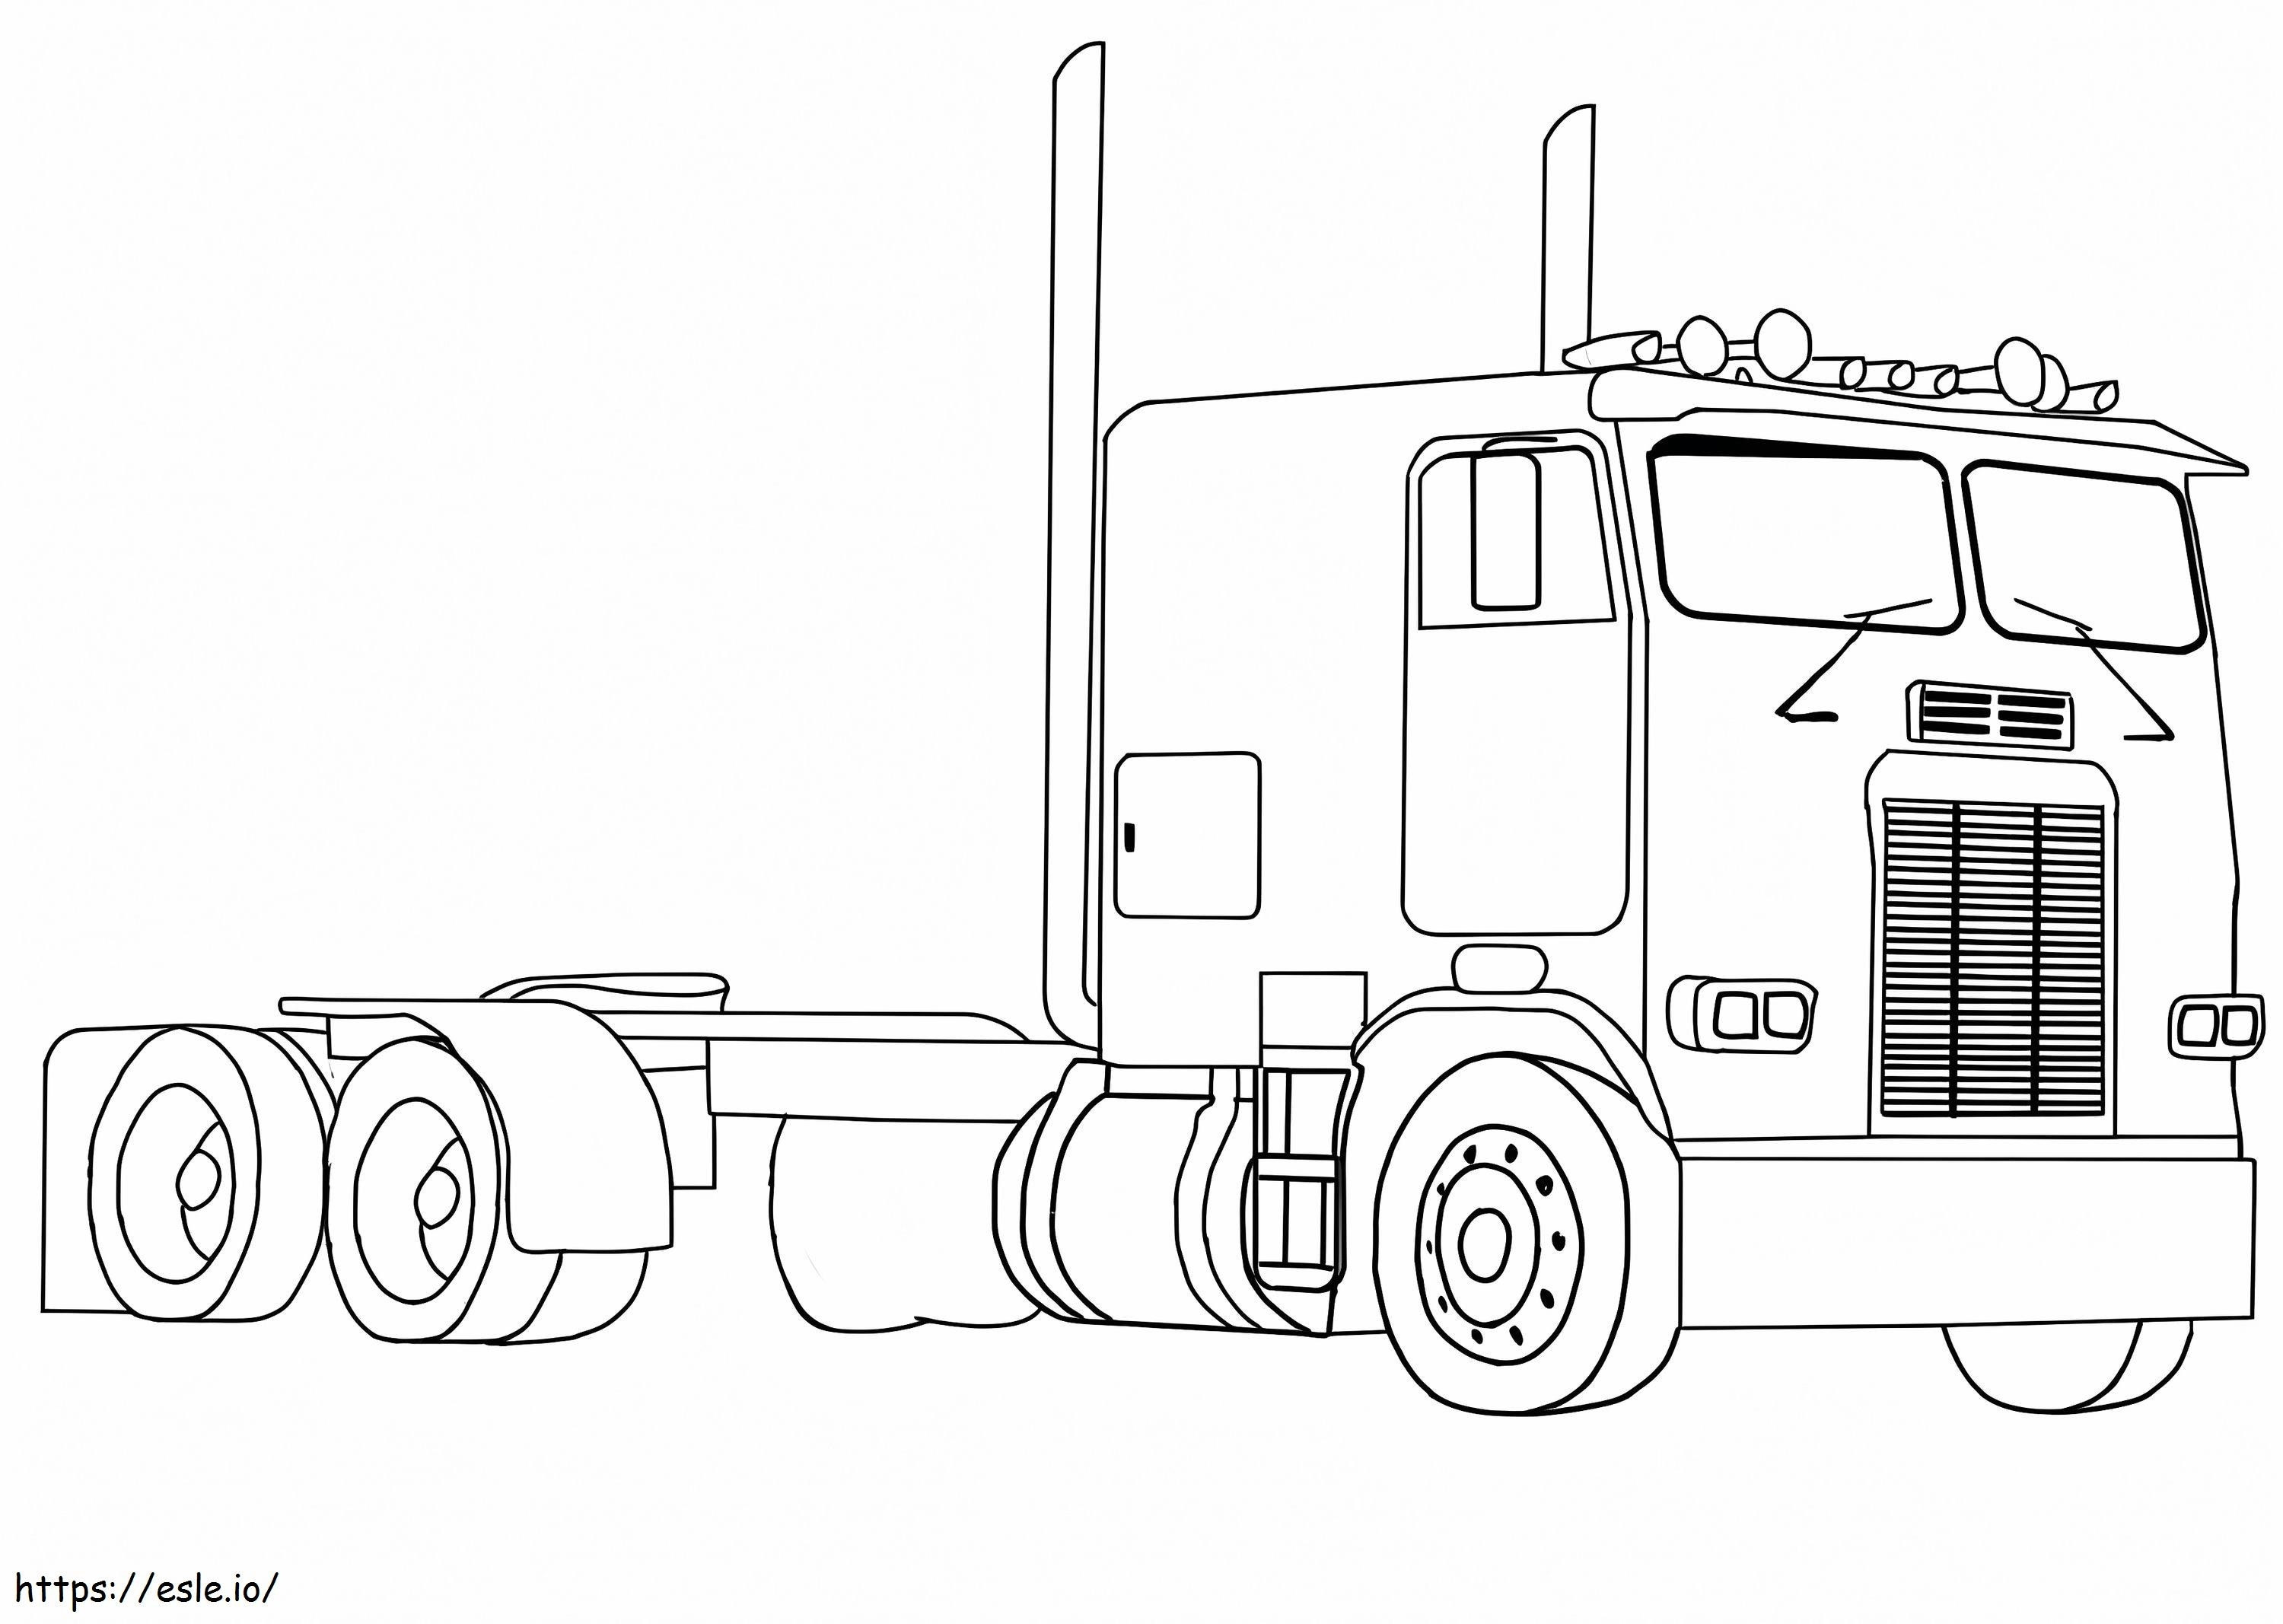 Freightliner FLA coloring page